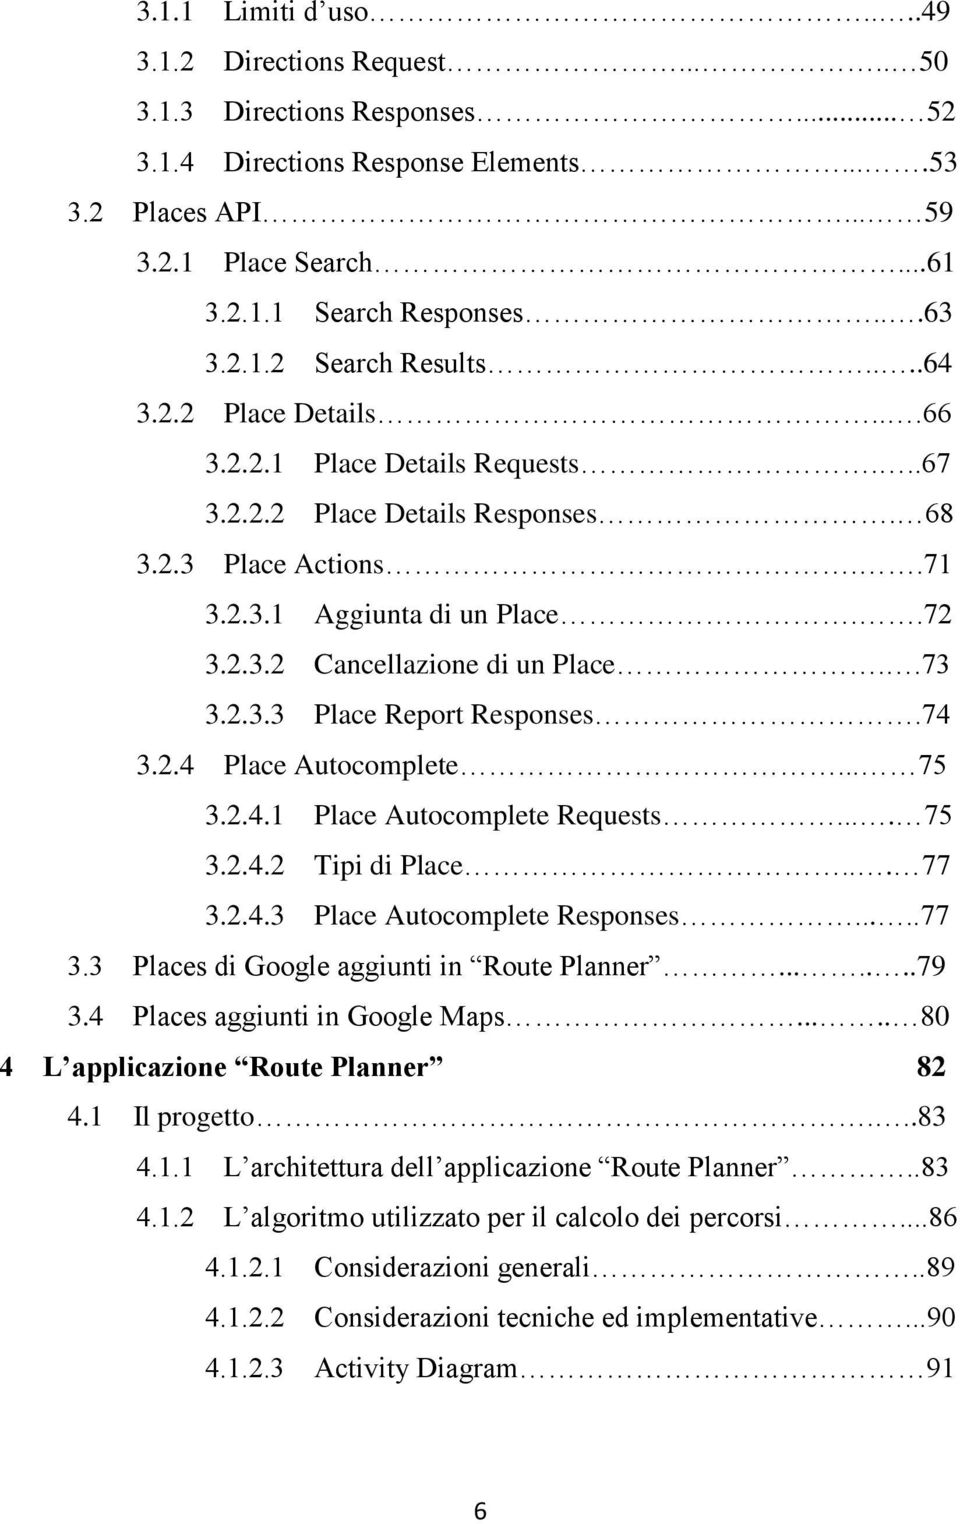 .73 3.2.3.3 Place Report Responses.74 3.2.4 Place Autocomplete... 75 3.2.4.1 Place Autocomplete Requests.... 75 3.2.4.2 Tipi di Place... 77 3.2.4.3 Place Autocomplete Responses.....77 3.3 Places di Google aggiunti in Route Planner.